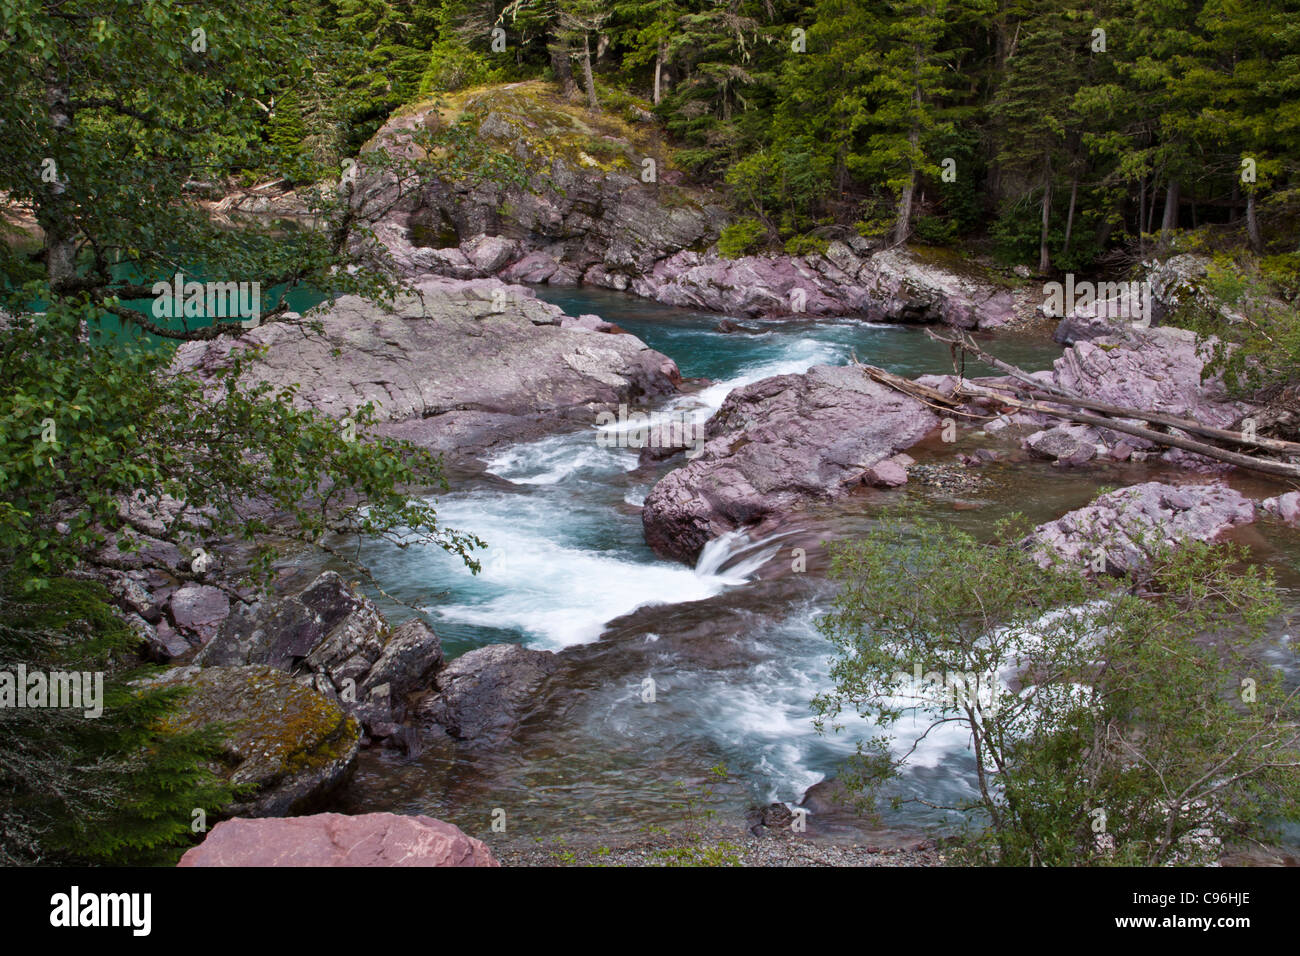 Rapids and rocks on 'Avalanche Creek' in Glacier National Park in Montana. Stock Photo